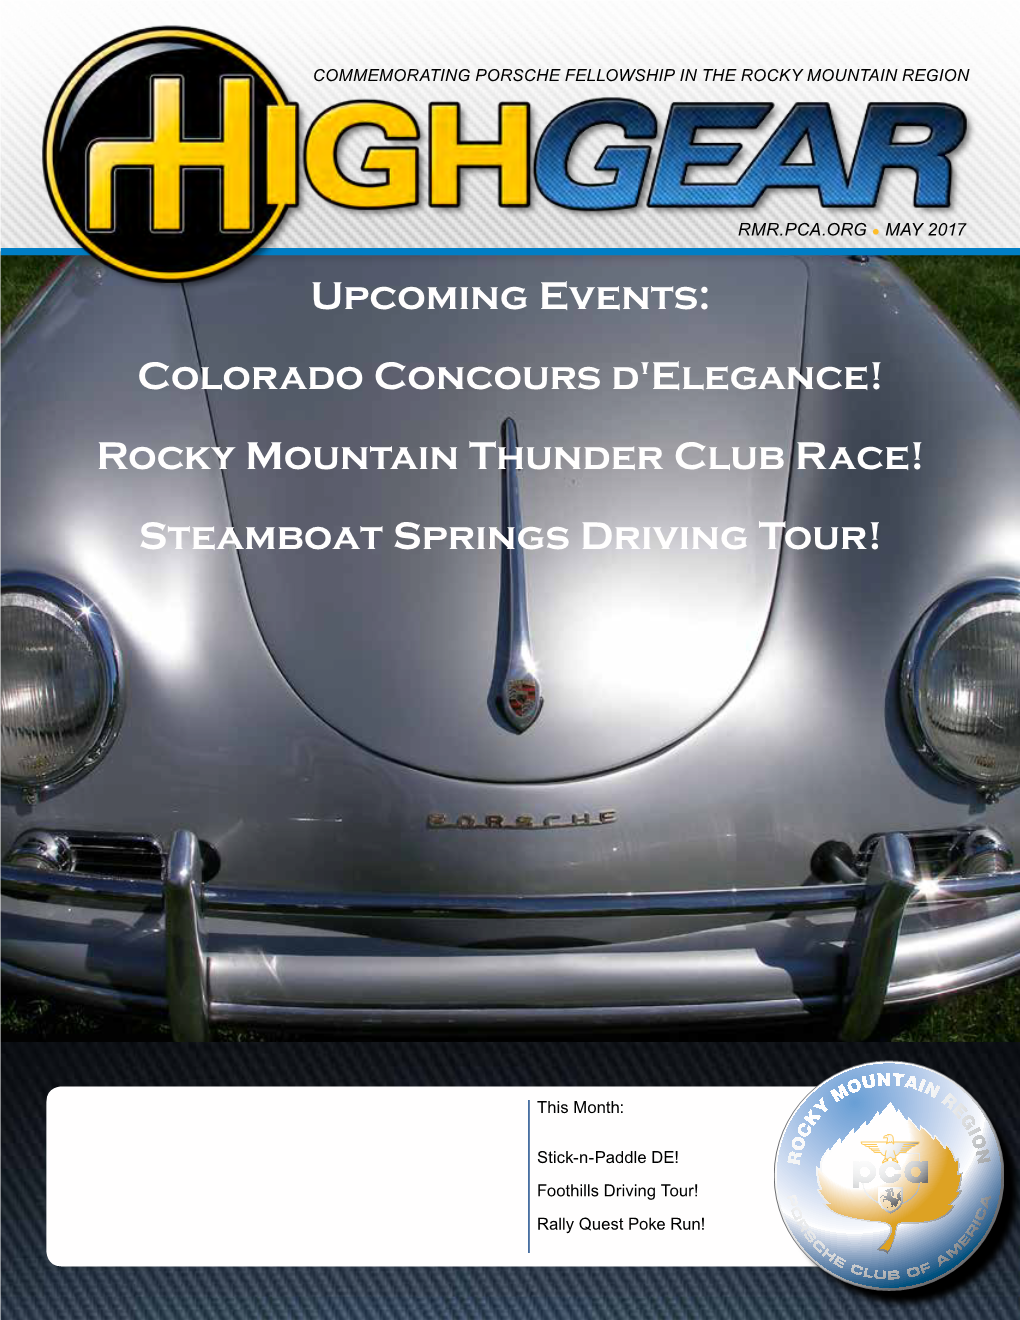 Colorado Concours D'elegance! Rocky Mountain Thunder Club Race! Steamboat Springs Driving Tour!